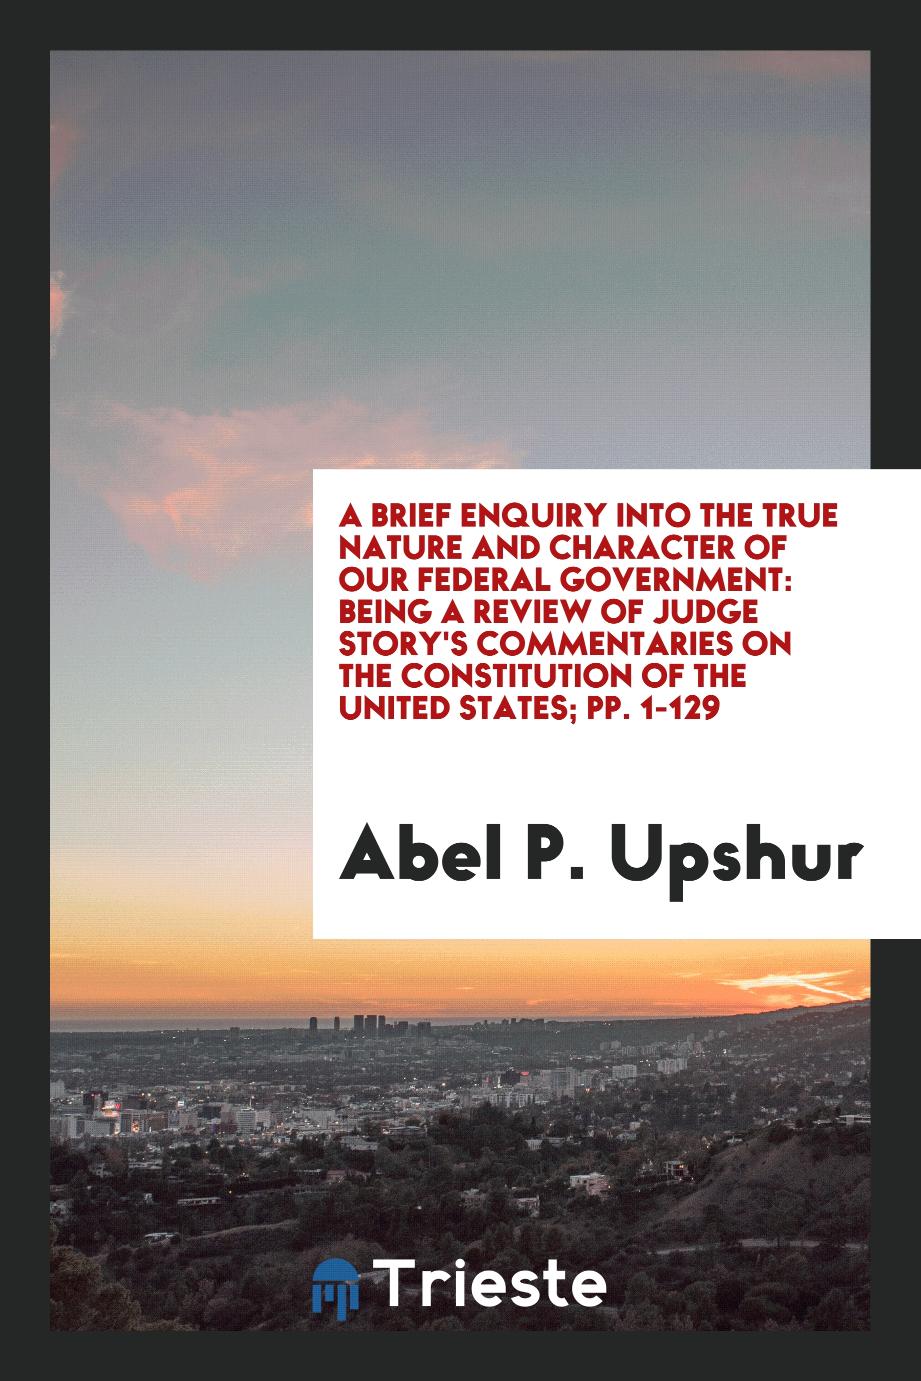 A Brief Enquiry Into the True Nature and Character of Our Federal Government: Being a Review of Judge Story's Commentaries on the Constitution of the United States; pp. 1-129